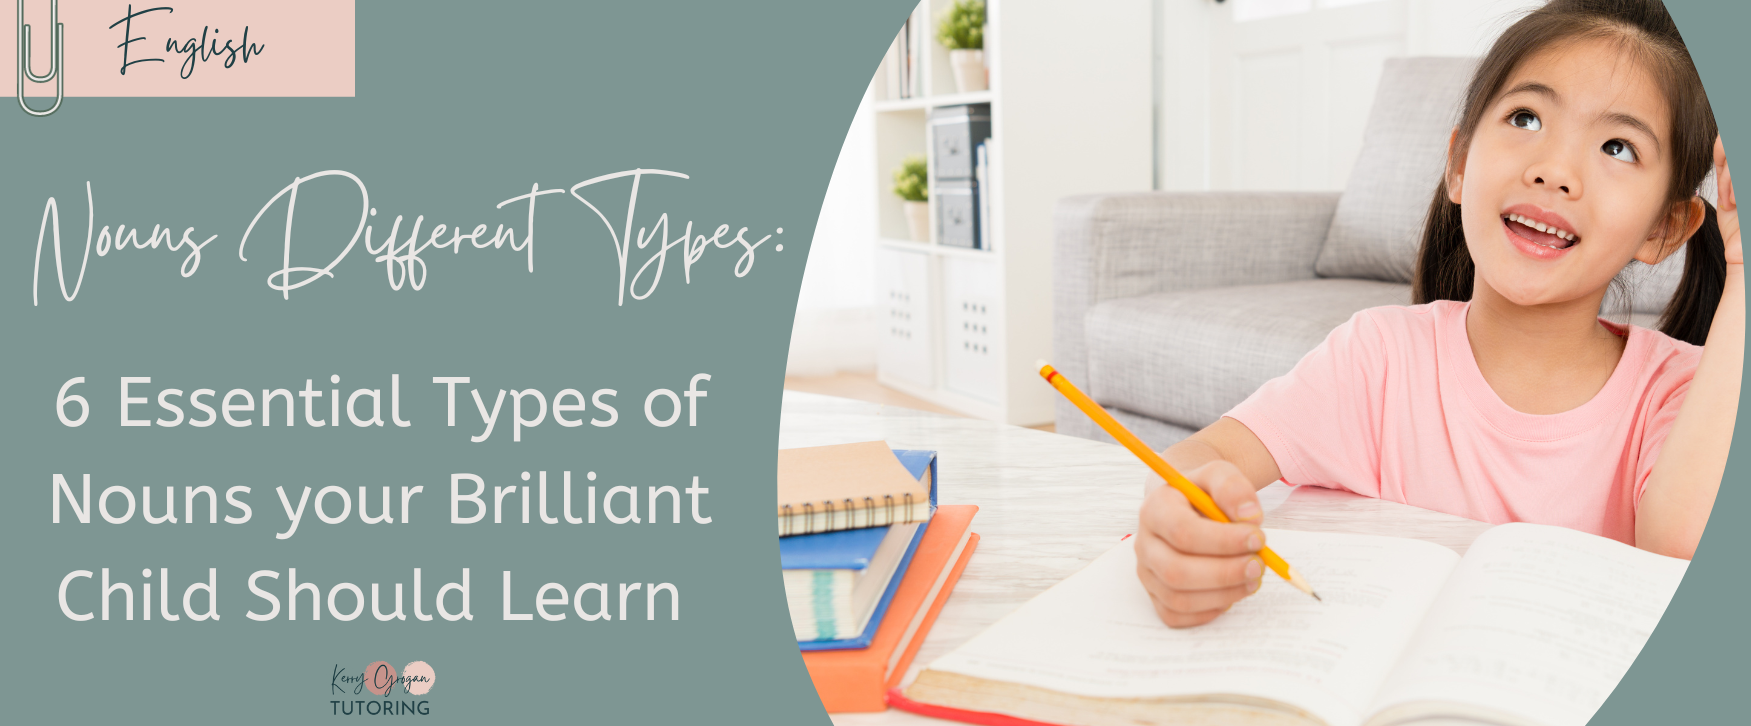 Nouns Different Types: 6 Essential Types of Nouns your Brilliant Child Should Learn